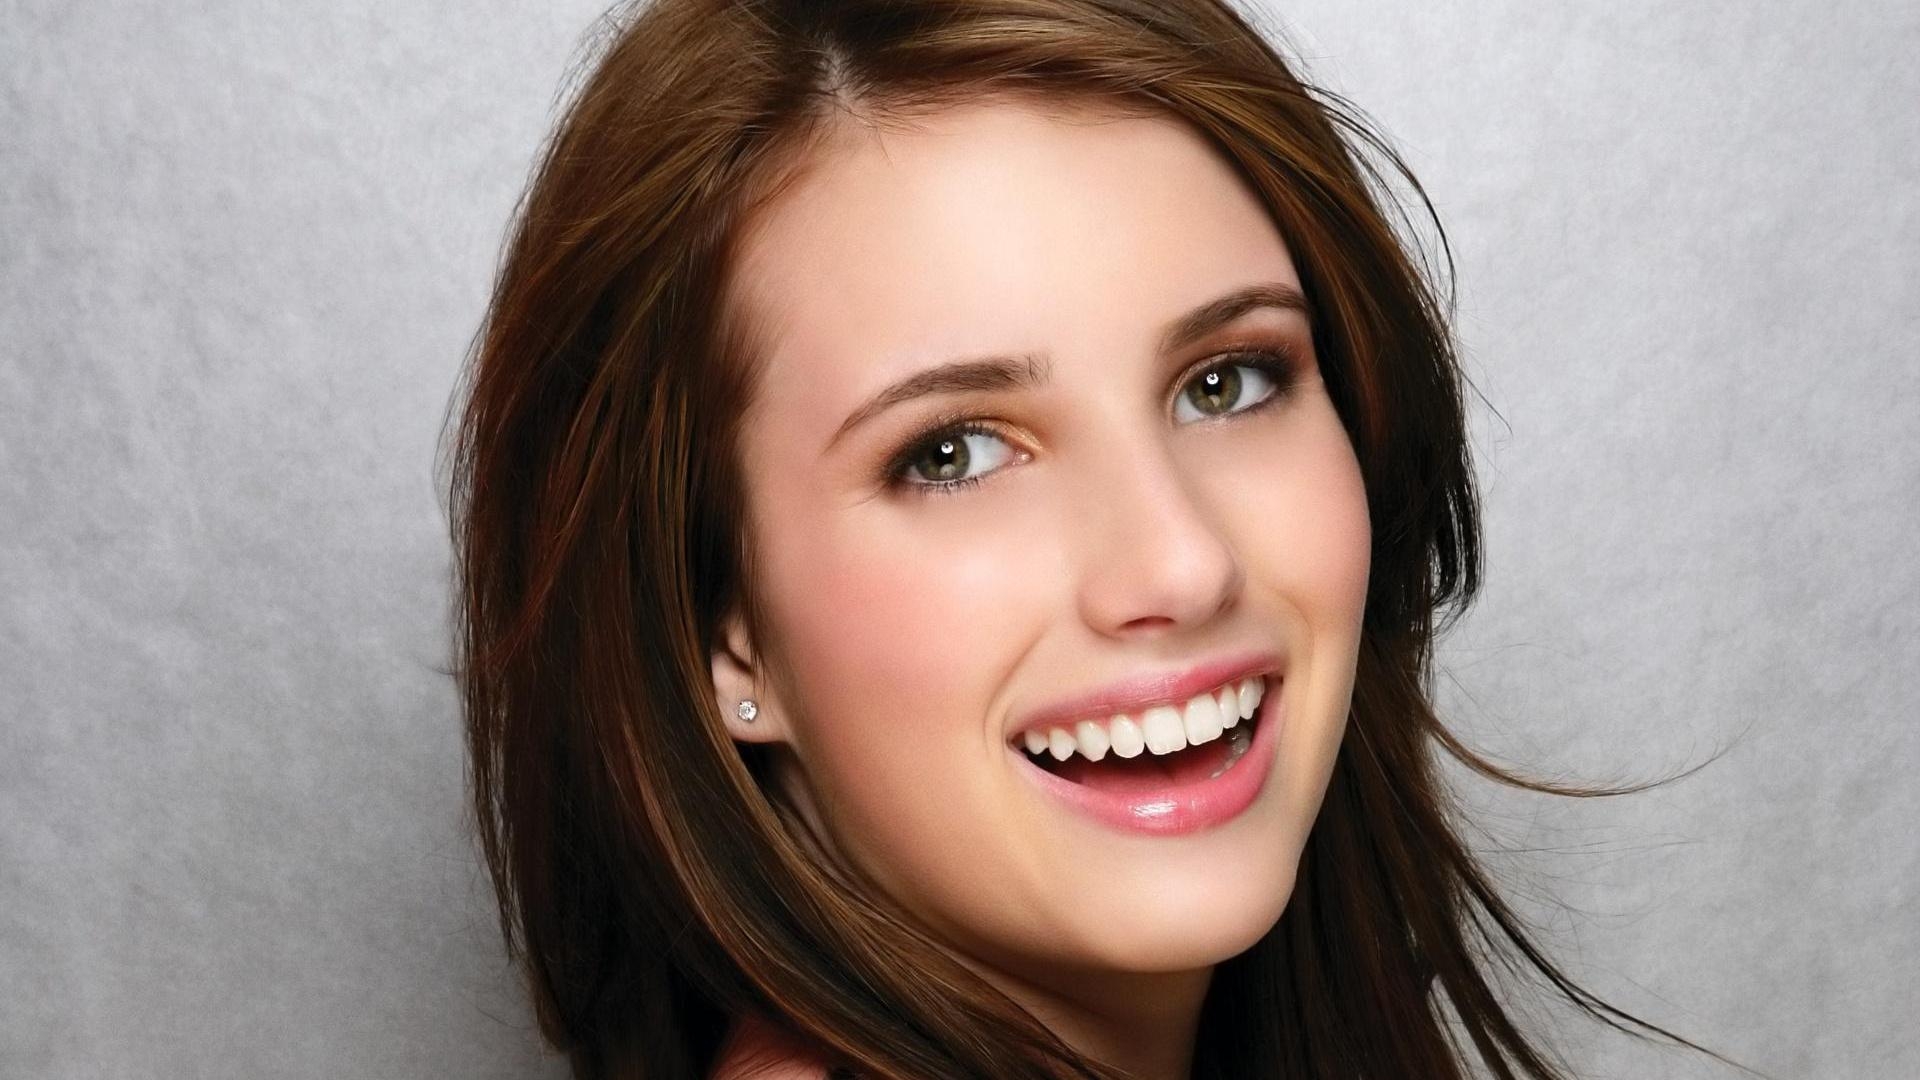 Emma Roberts Smile for 1920 x 1080 HDTV 1080p resolution